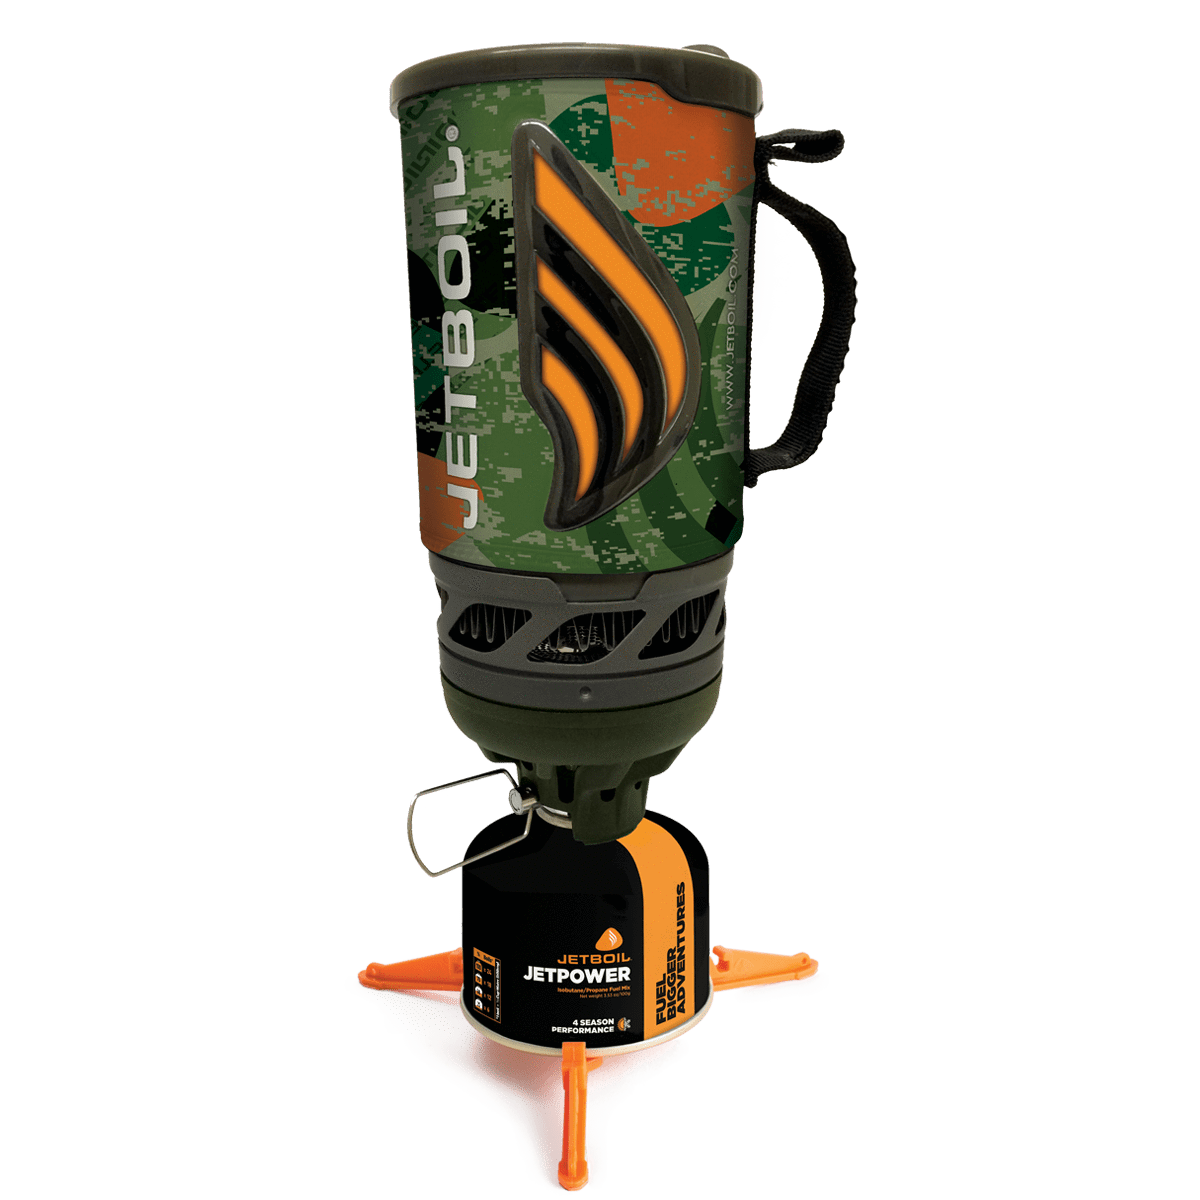 Jetboil Jetboil Flash Jetcam Green camping